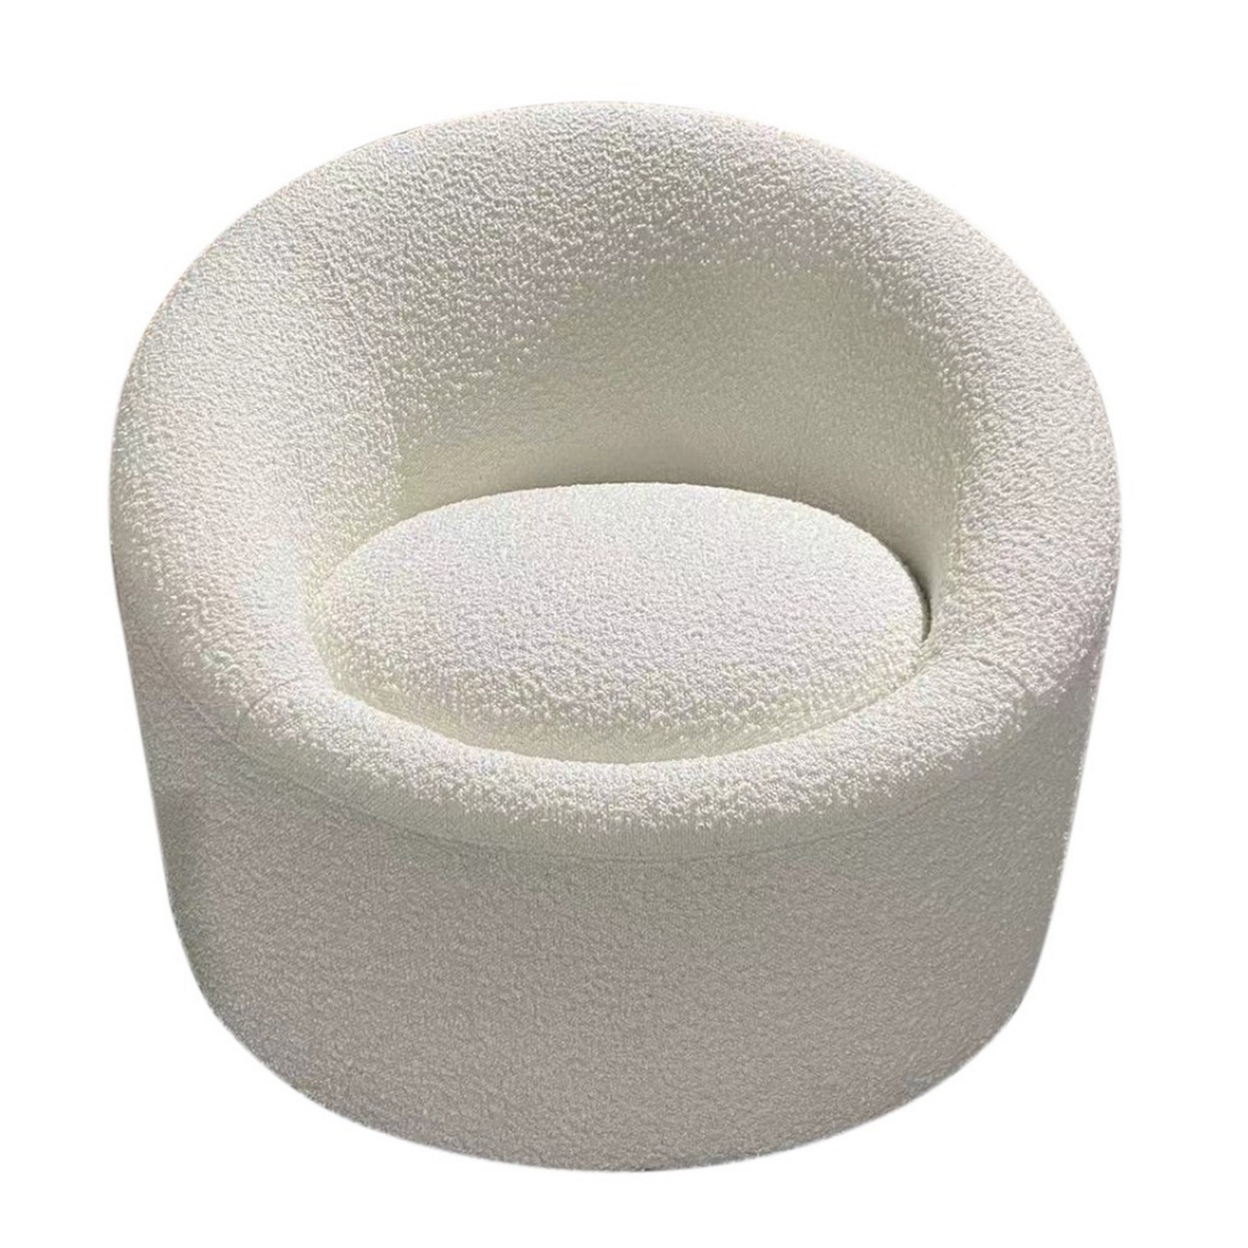 33 Inch Accent Chair, White Smooth Soft Polyester Fabric, Swivel Base- Saltoro Sherpi